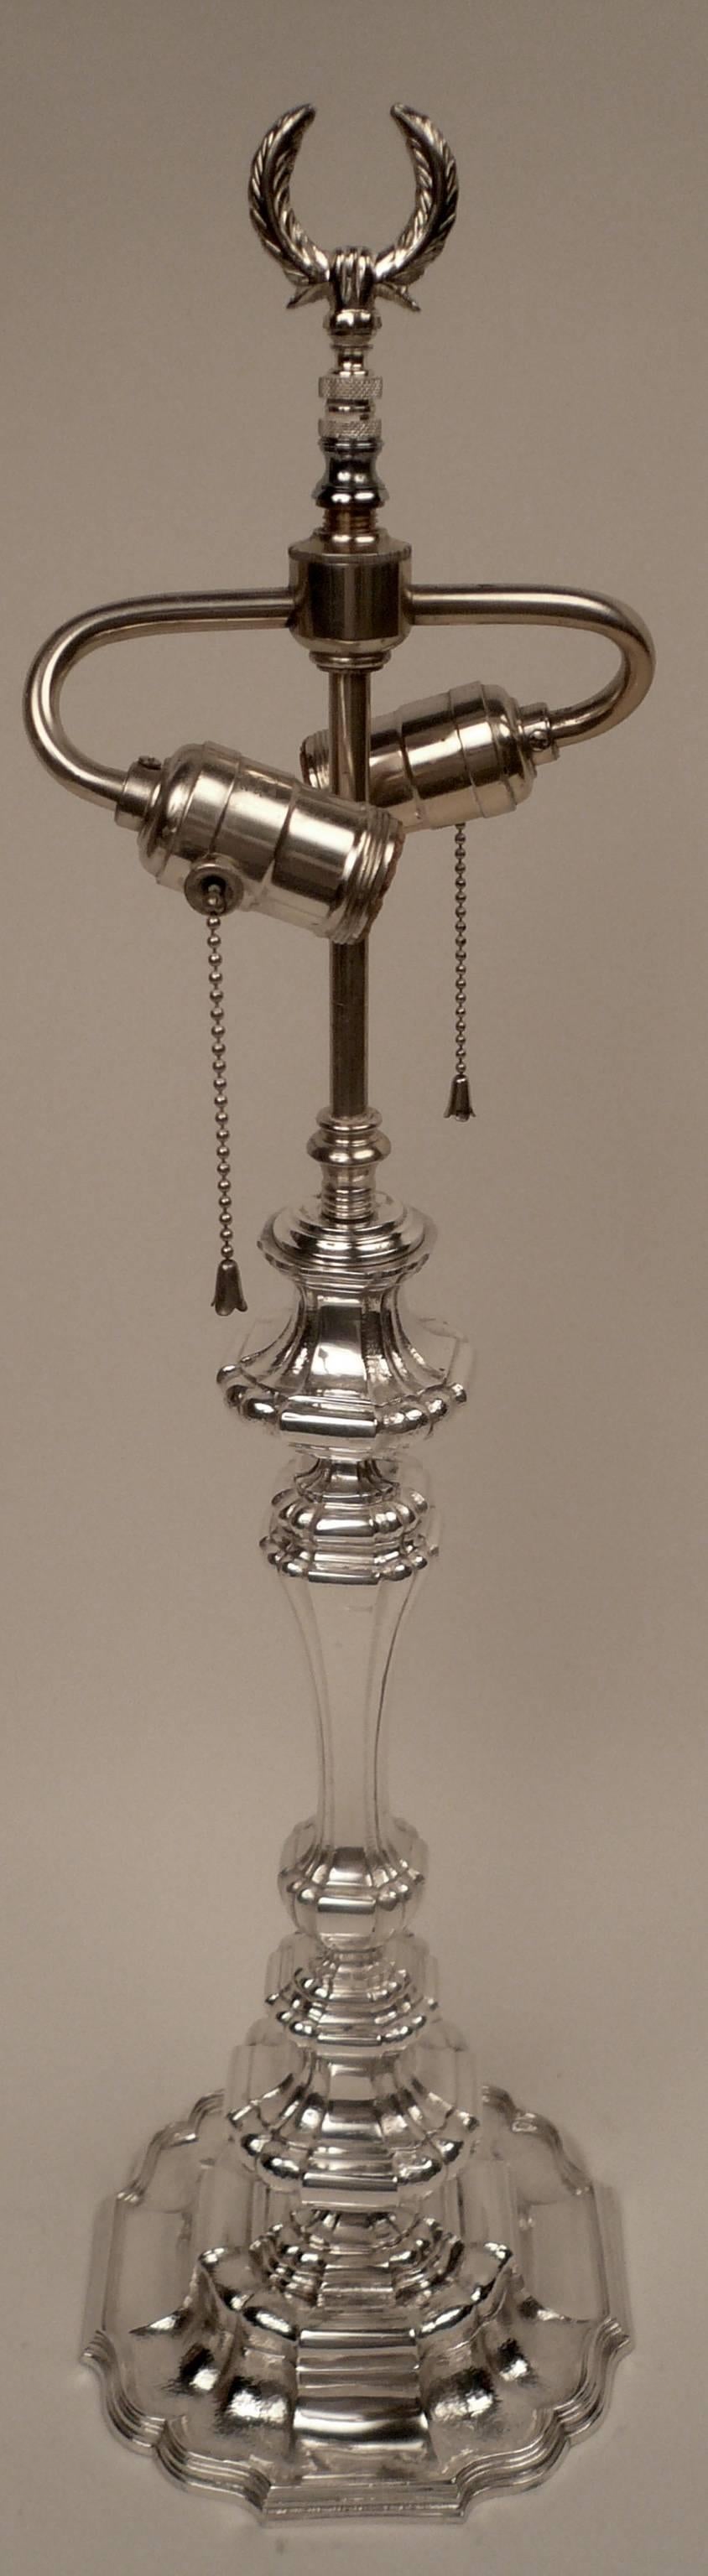 This Caldwell quality early Georgian style lamp retains it's original finish and is in Fine condition. It is of generous proportion, and features hand-hammered elements.